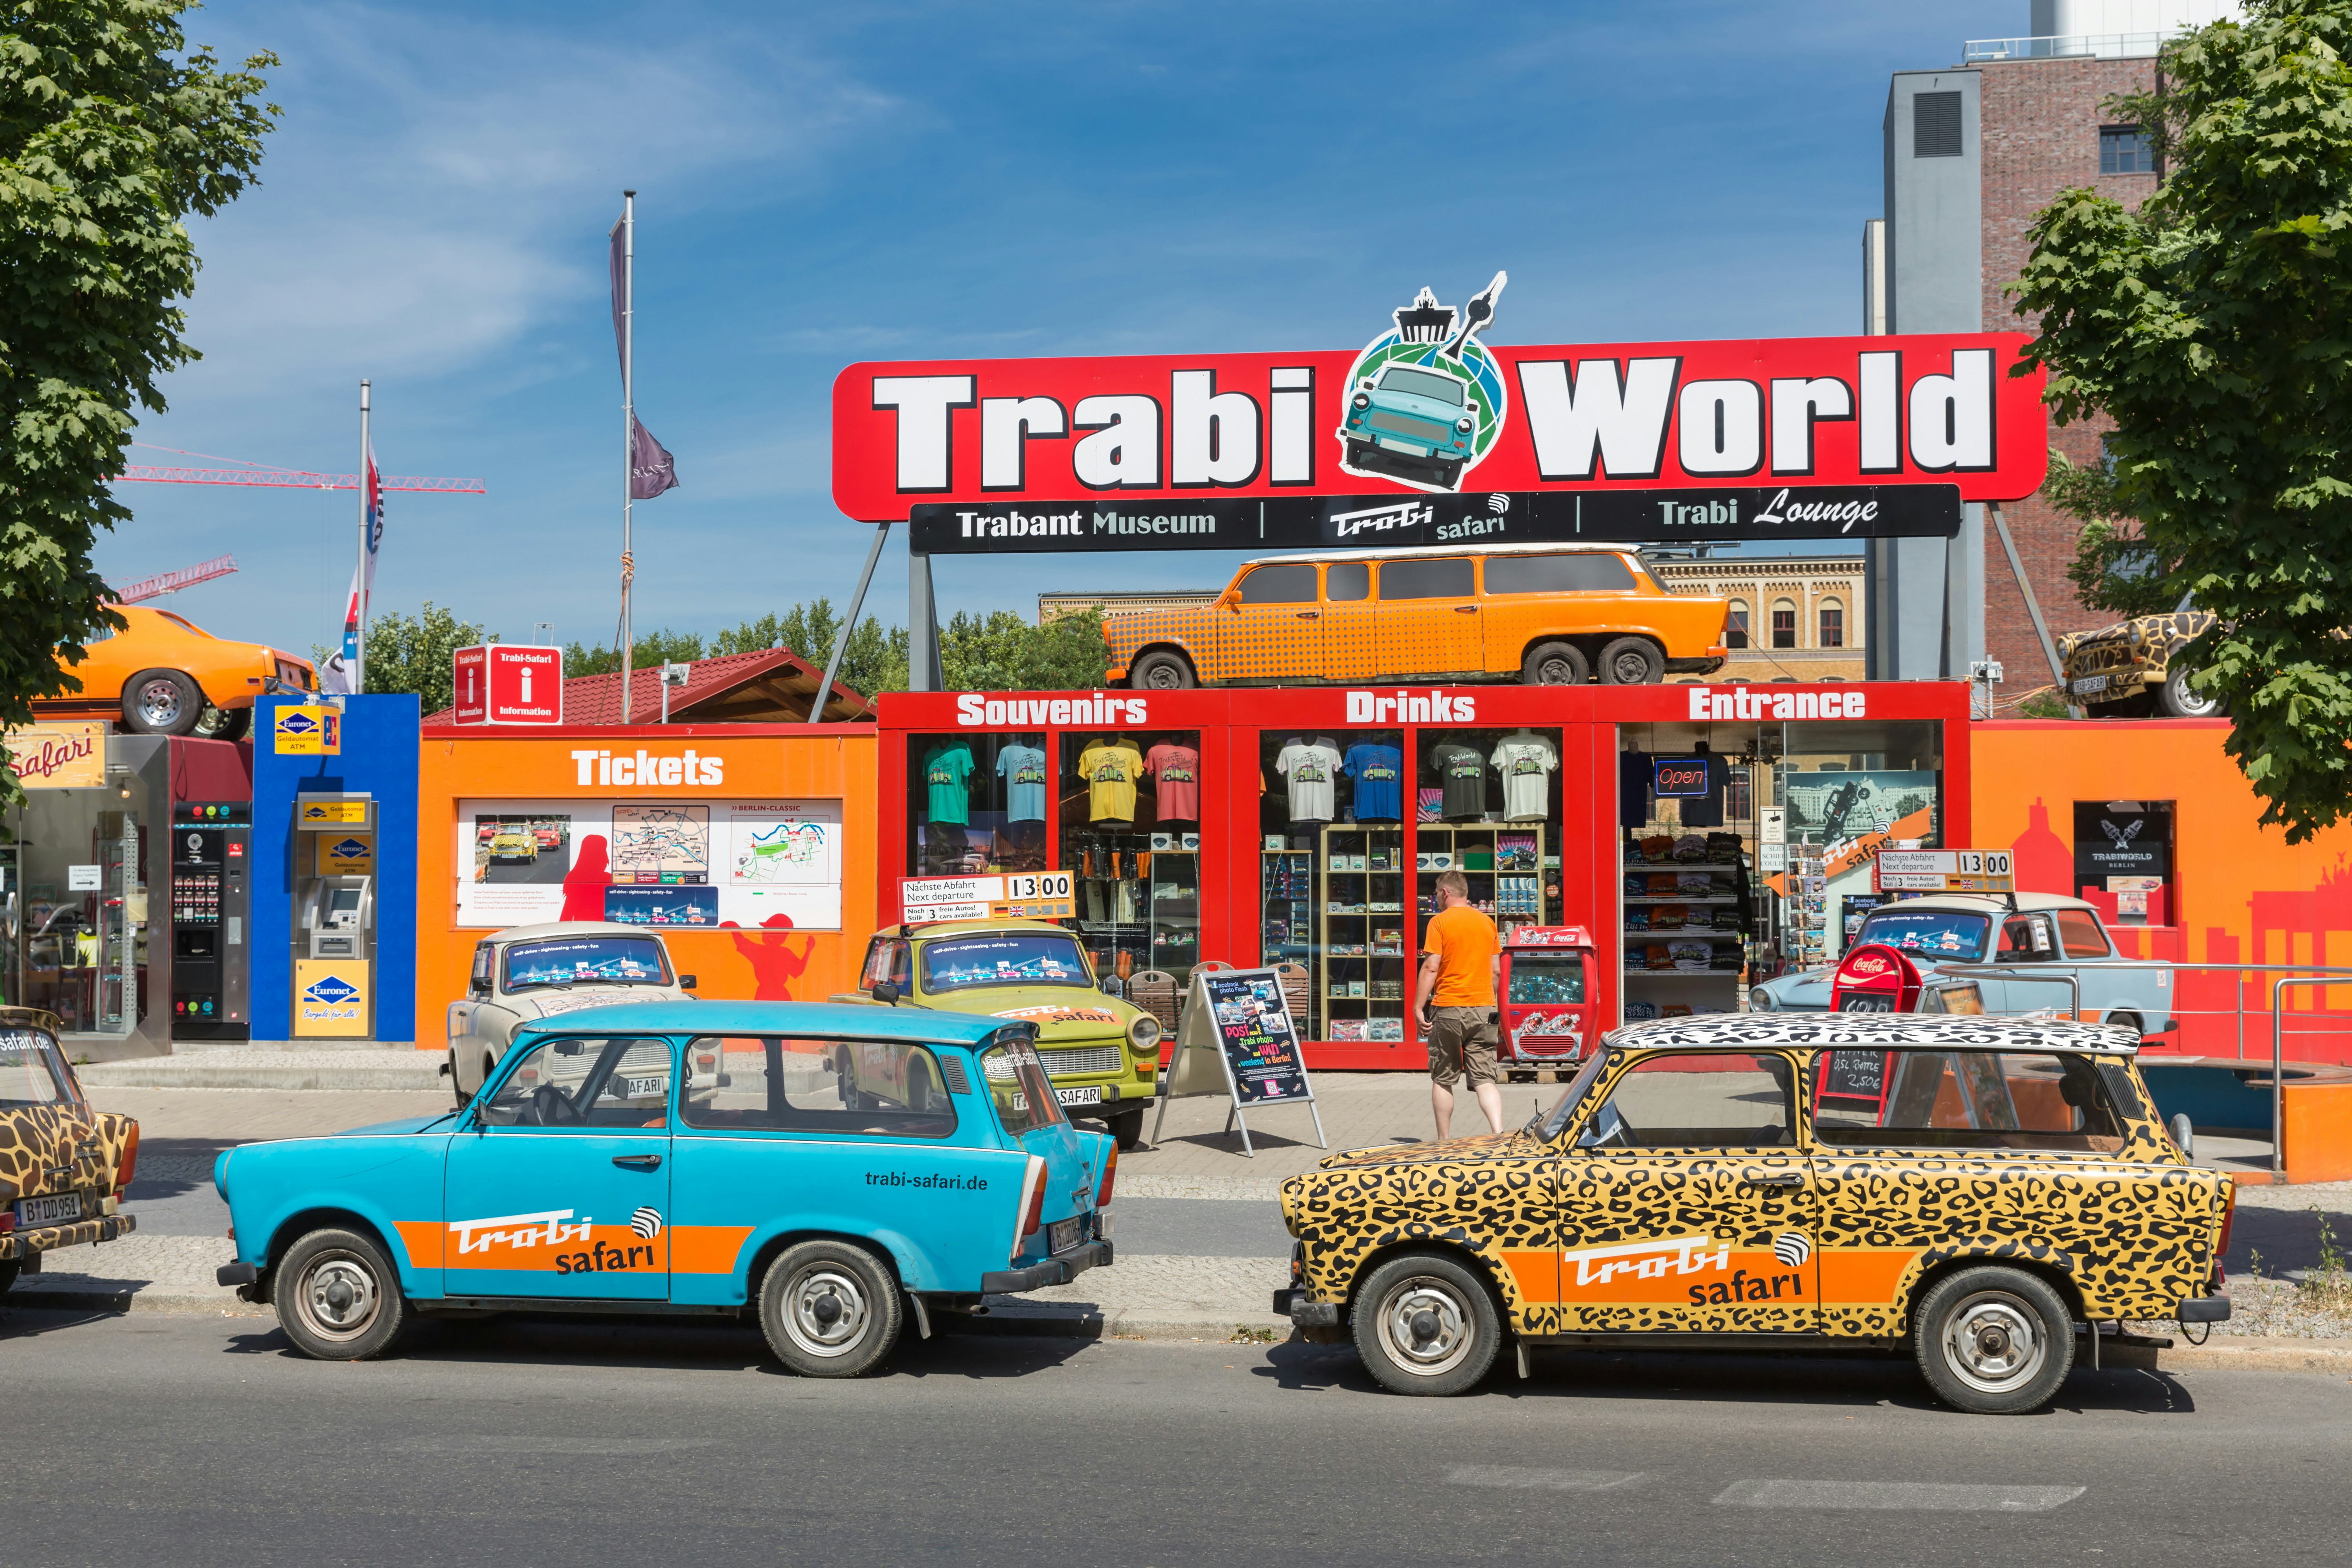 Colorful trabant cars parked on a street in front of a sign saying "Trabi World"